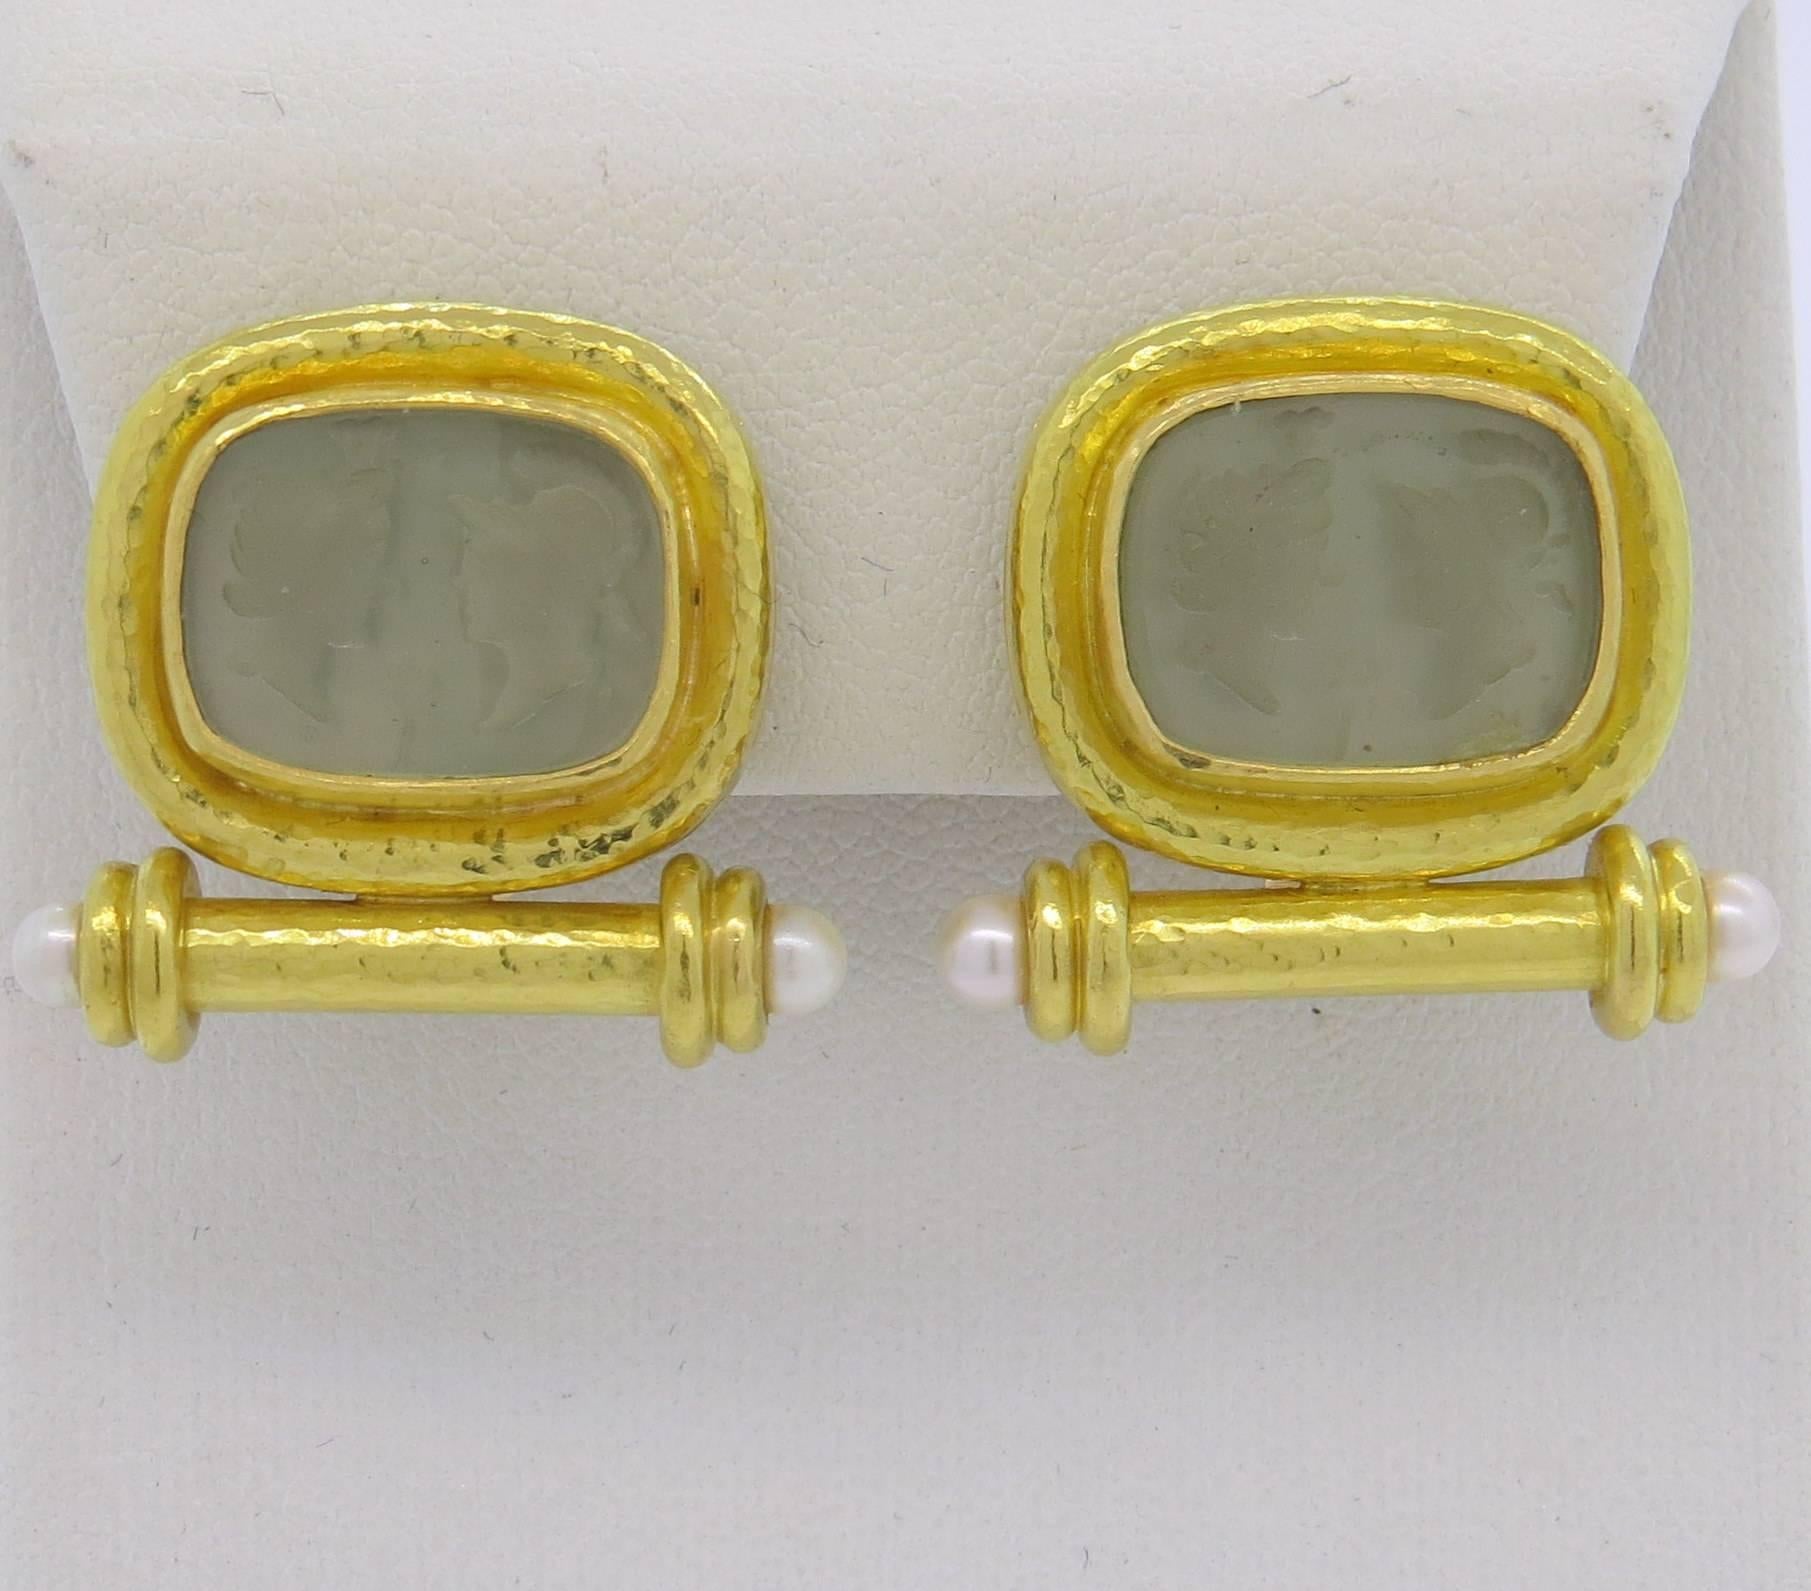 A pair of 18k yellow gold earrings, crafted by Elizabeth Locke, decorated with Venetian glass intaglio, backed with mother of pearl, each set with two pearls. Earrings measure 22mm x 26mm, have collapsible posts. Marked with Locke hallmark and 18k.